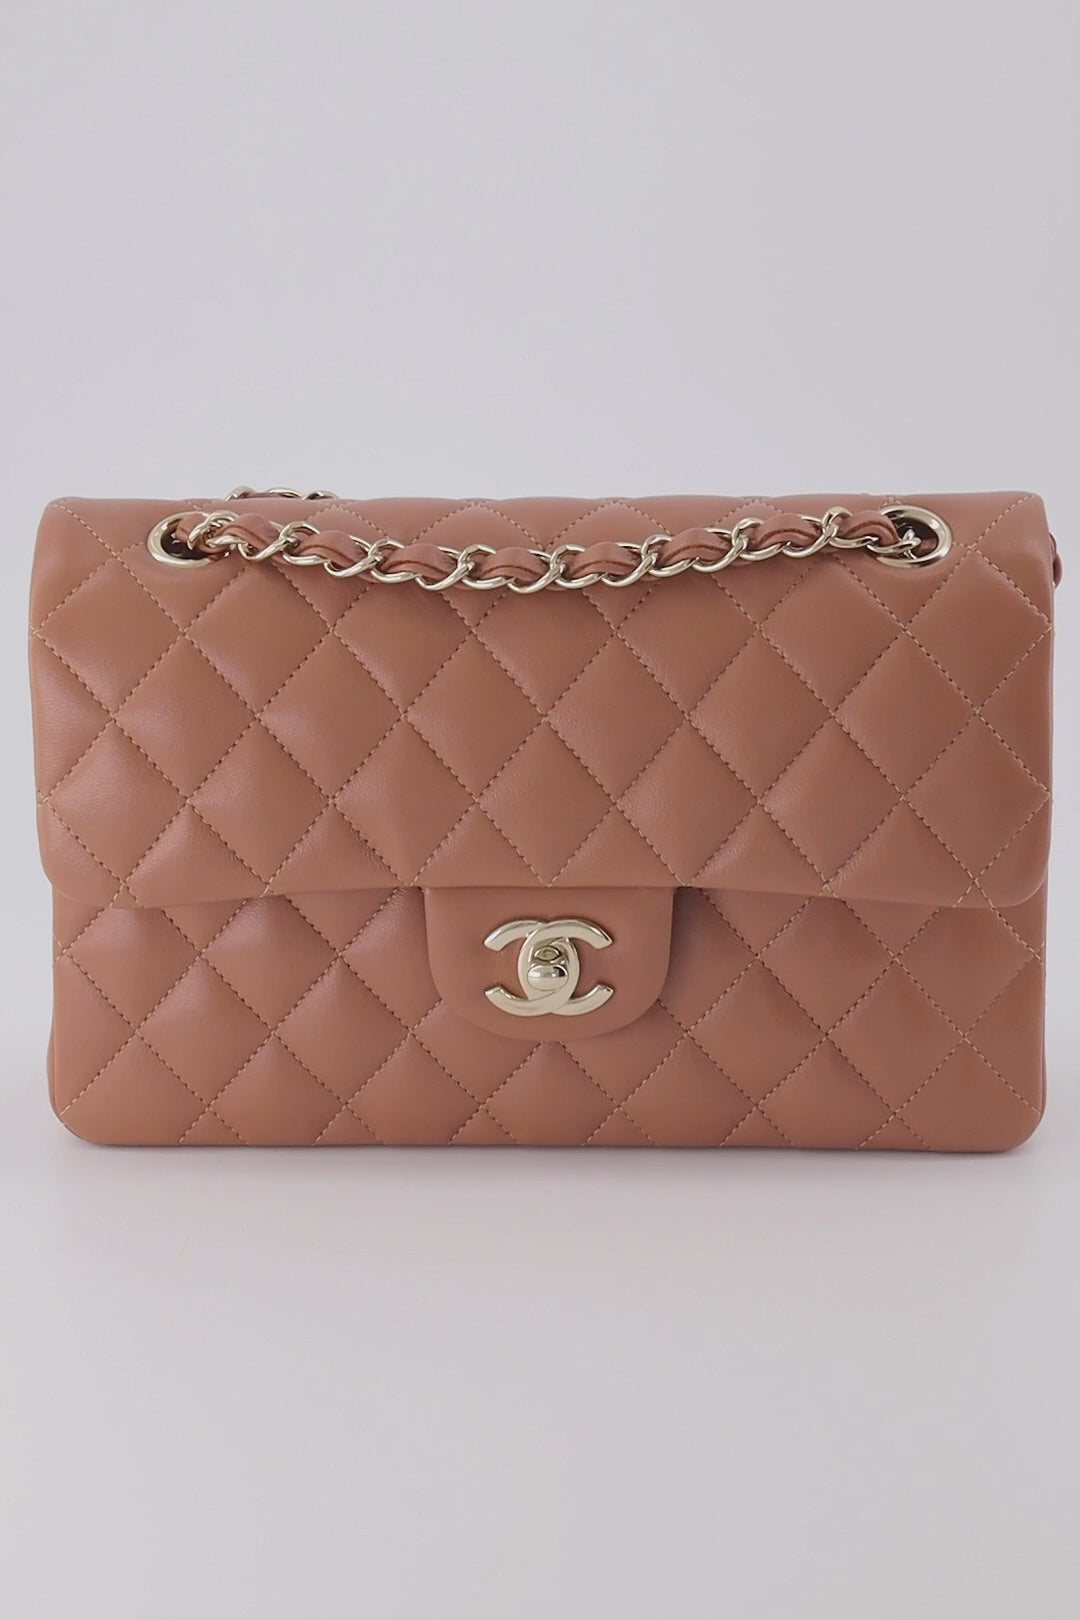 Chanel Camel Small Classic Double Flap Bag